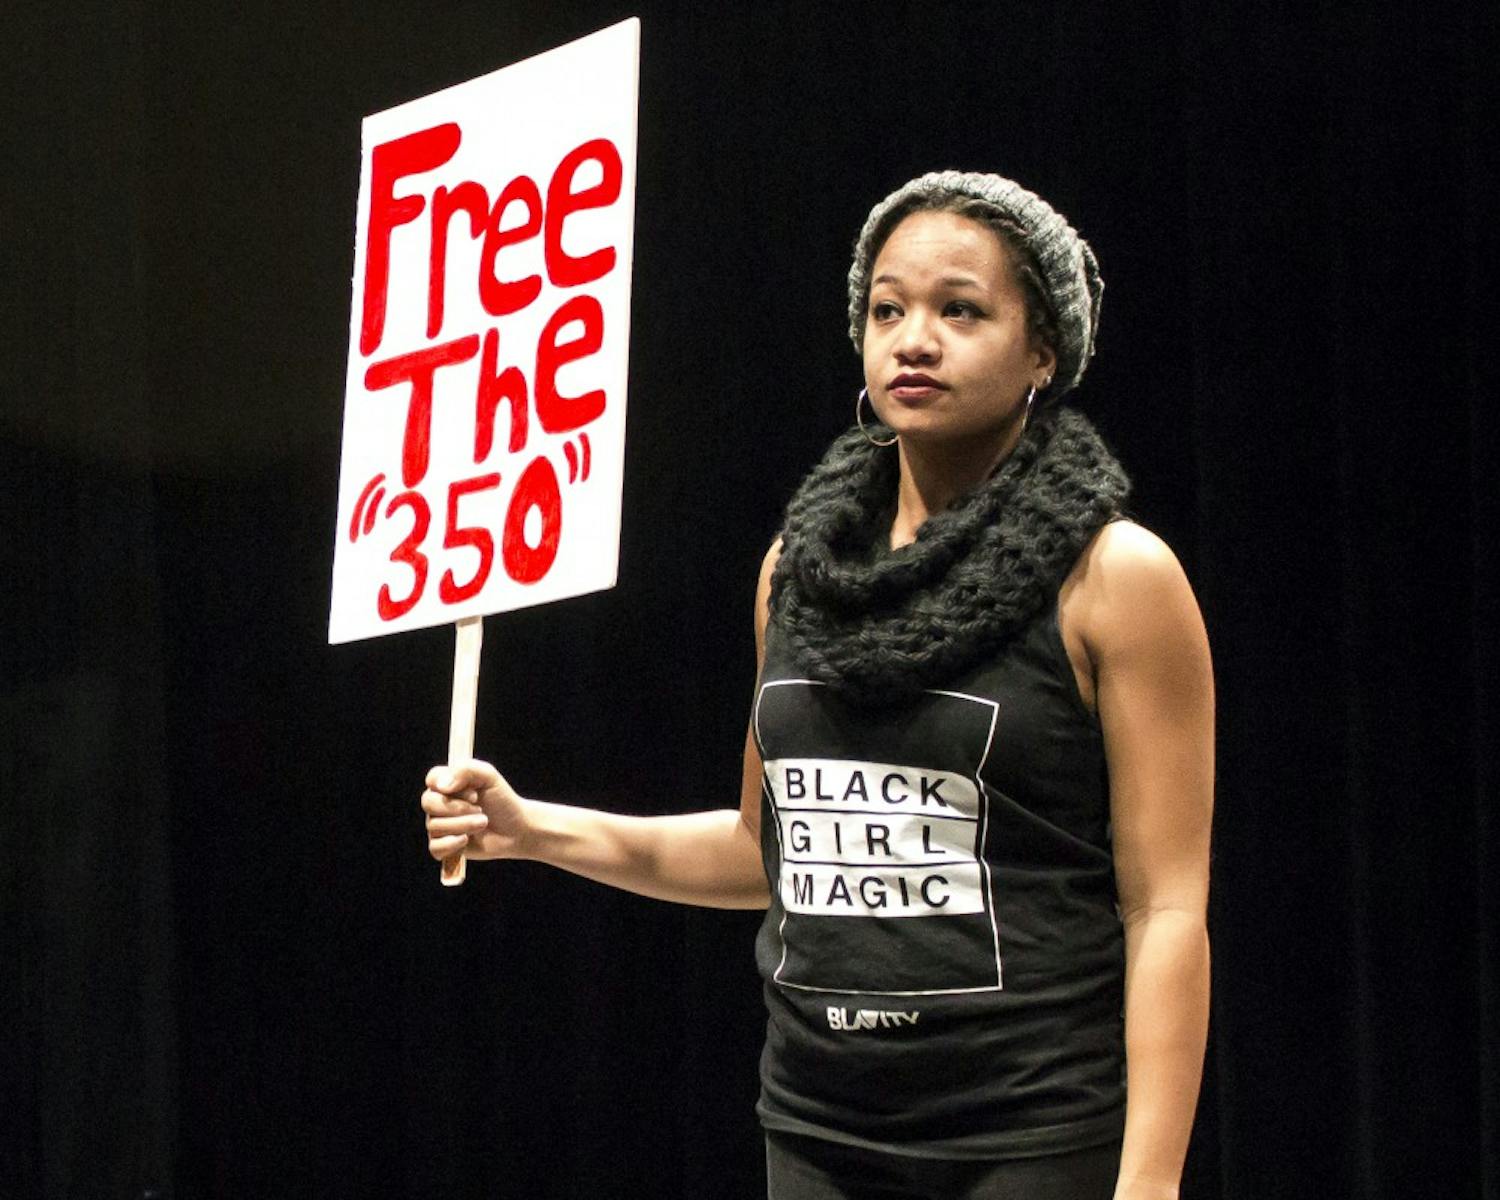 Memorial Union hosted "We the 350," which featured stories of poverty, drug addiction, homelessness and incarceration in Dane County, to begin Black History Month.